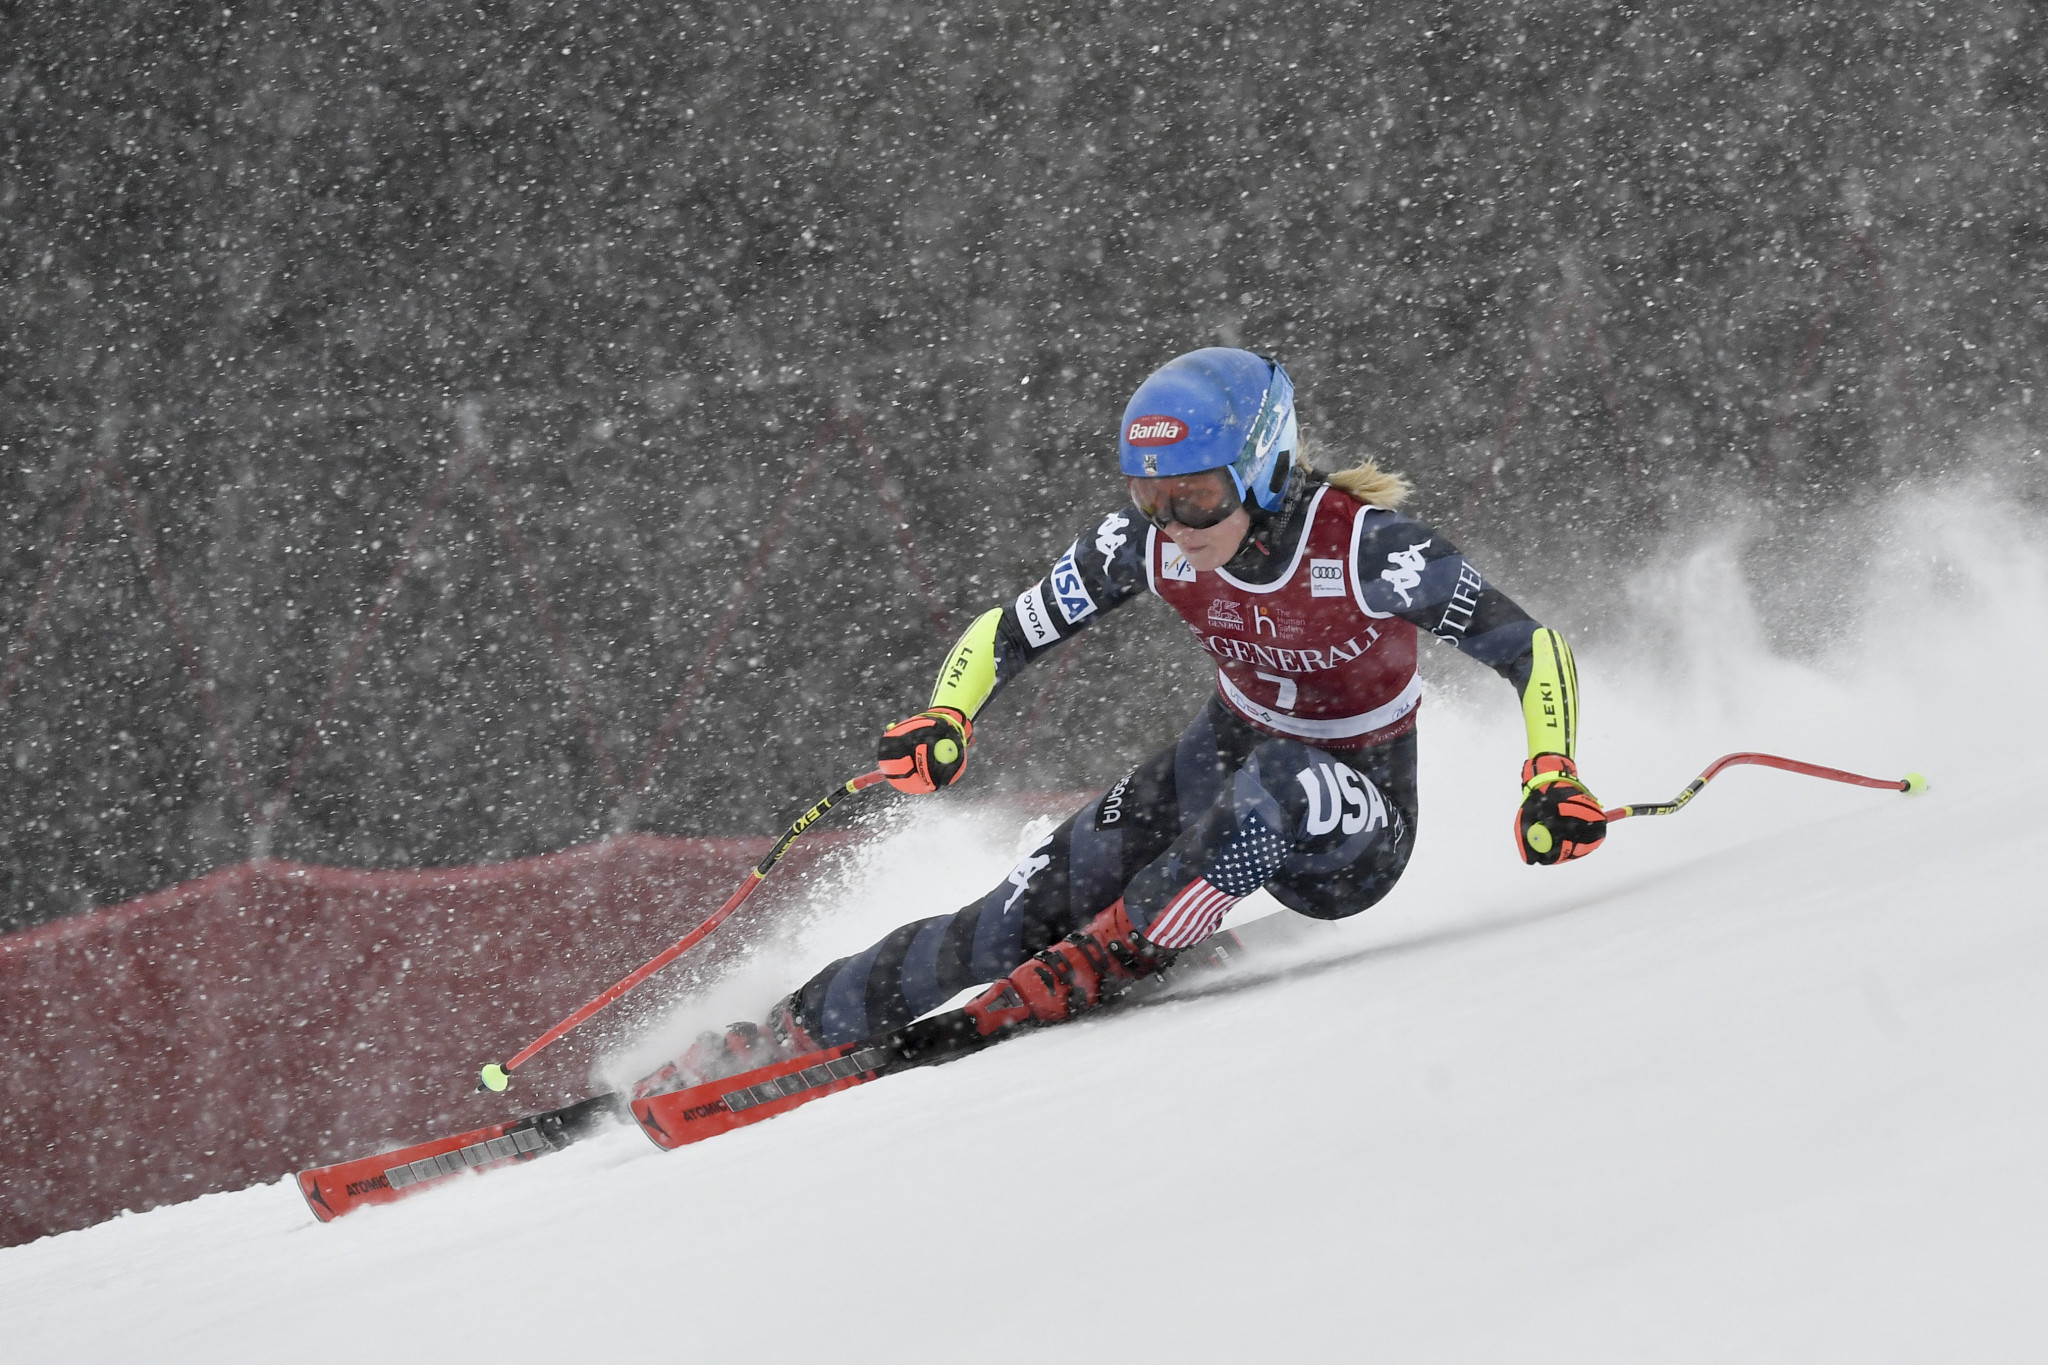 The United States' Mikaela Shiffrin's wait for a record-equalling win went on after she placed seventh in tough conditions in Kvitfjell ©Getty Images